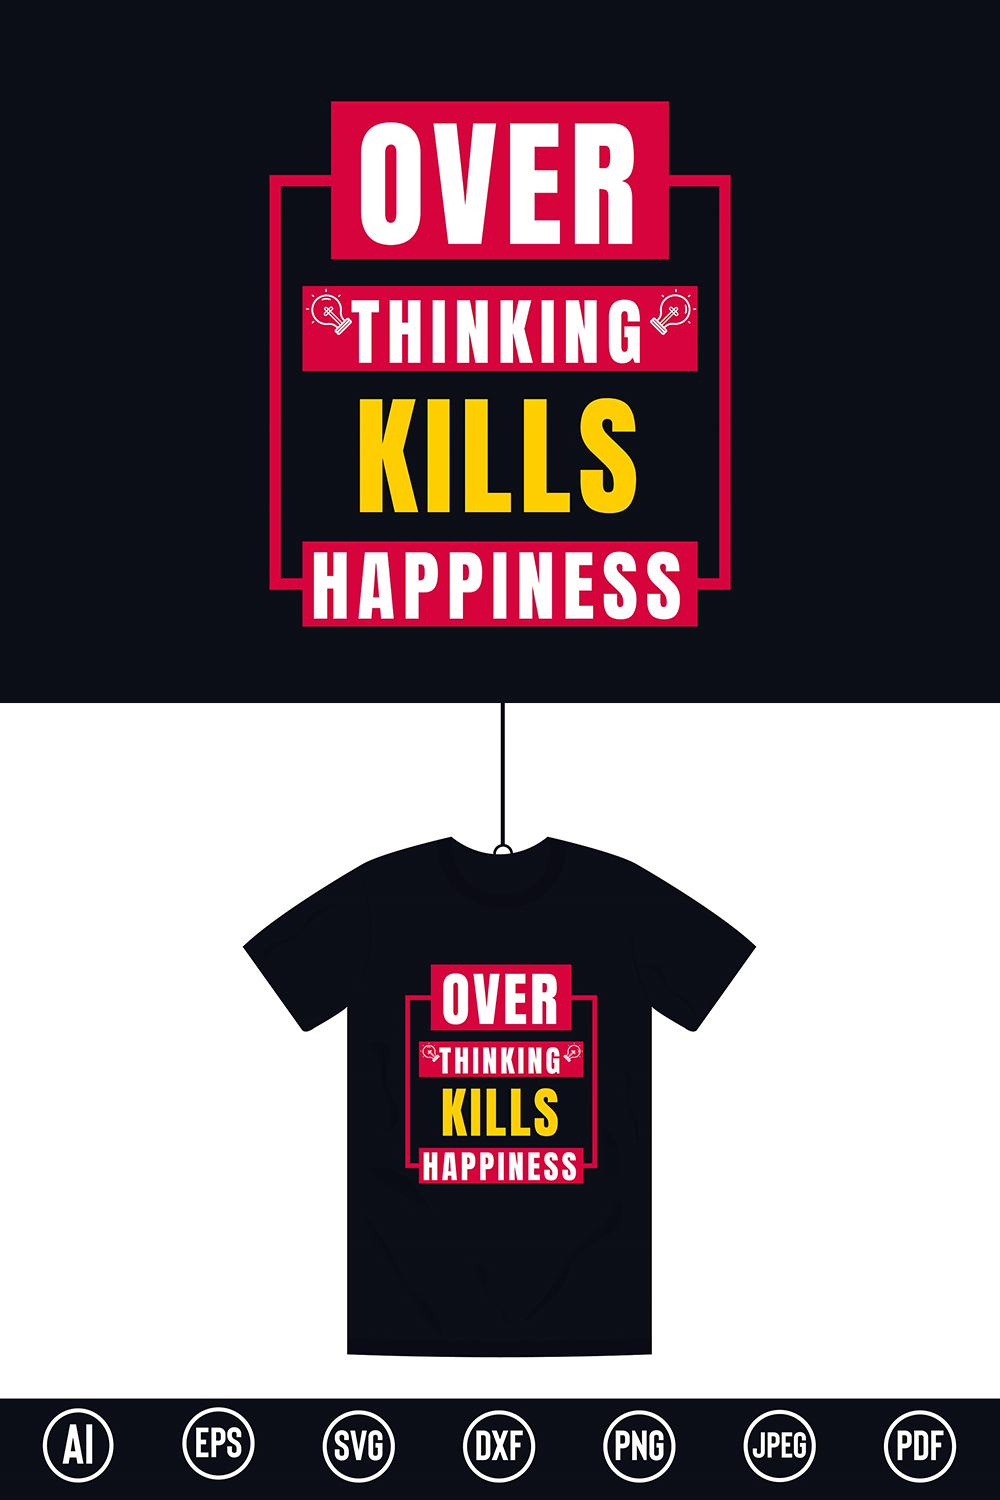 Modern Typography T-Shirt design with “Over Thinking Kills Happiness” quote for t-shirt, posters, stickers, mug prints, banners, gift cards, labels etc pinterest preview image.